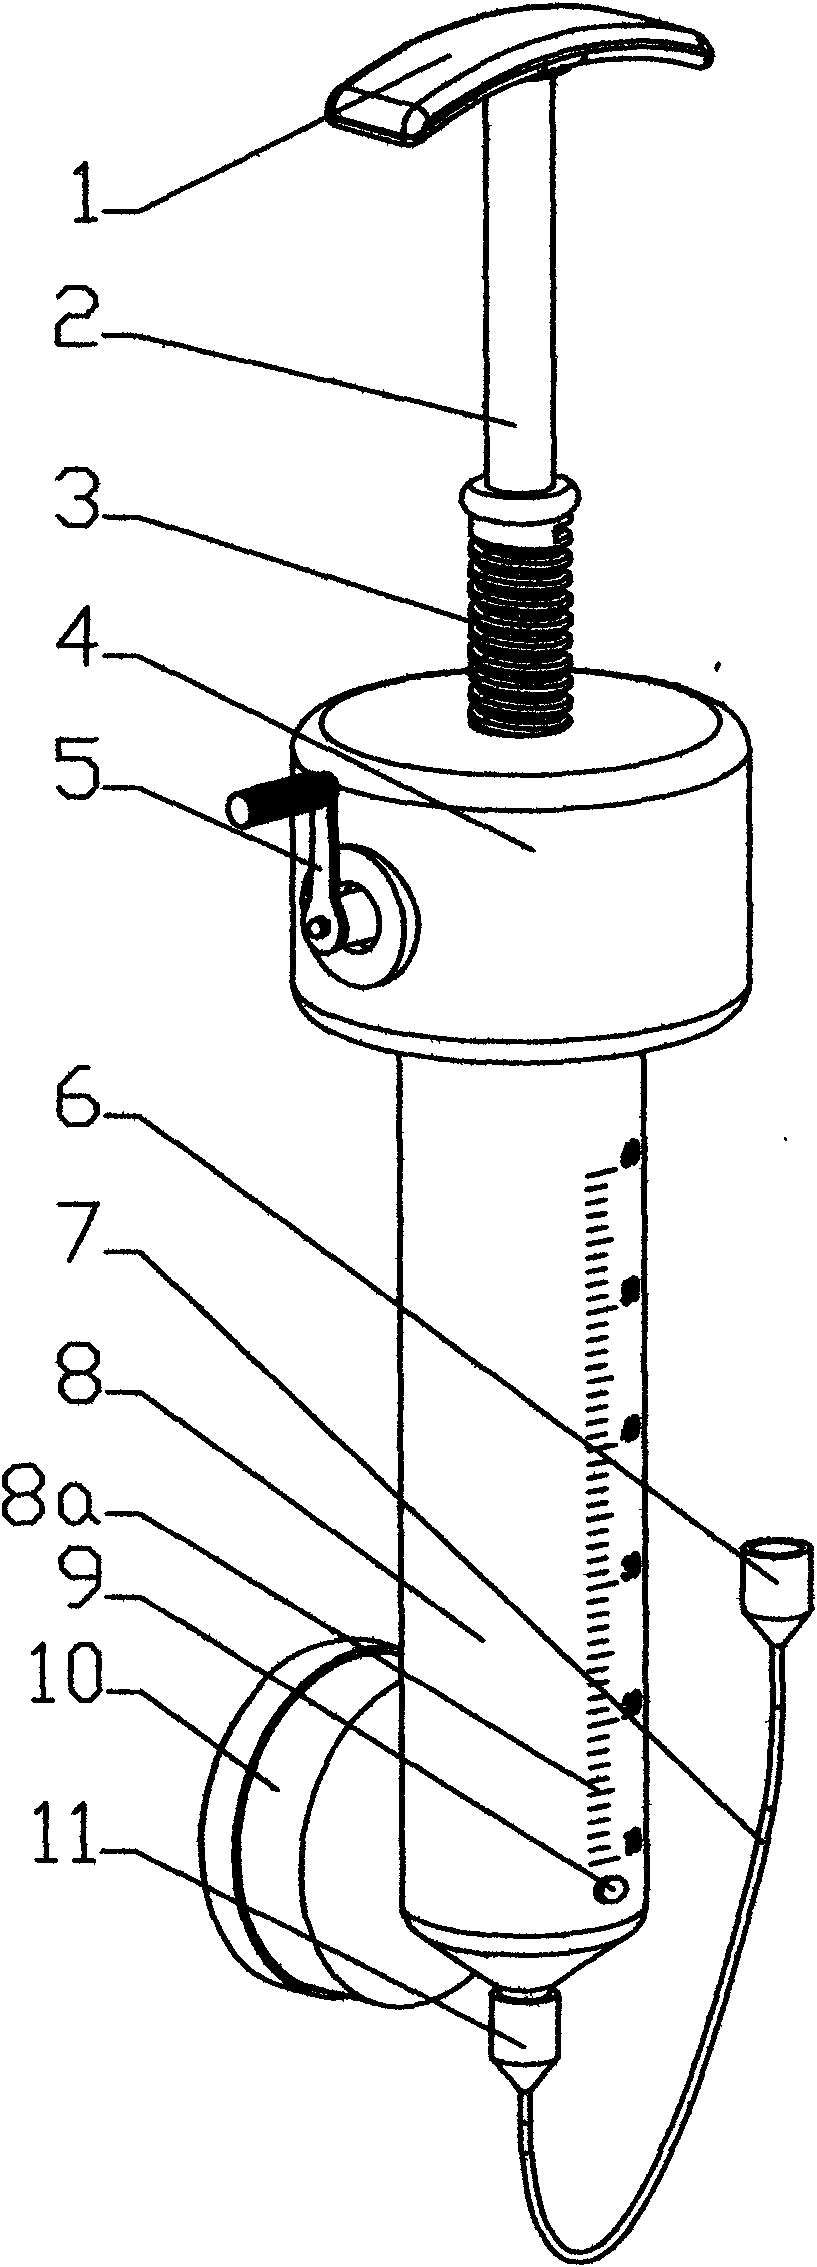 Medical saccule pressure pump with combination of straight push and rotary tuning